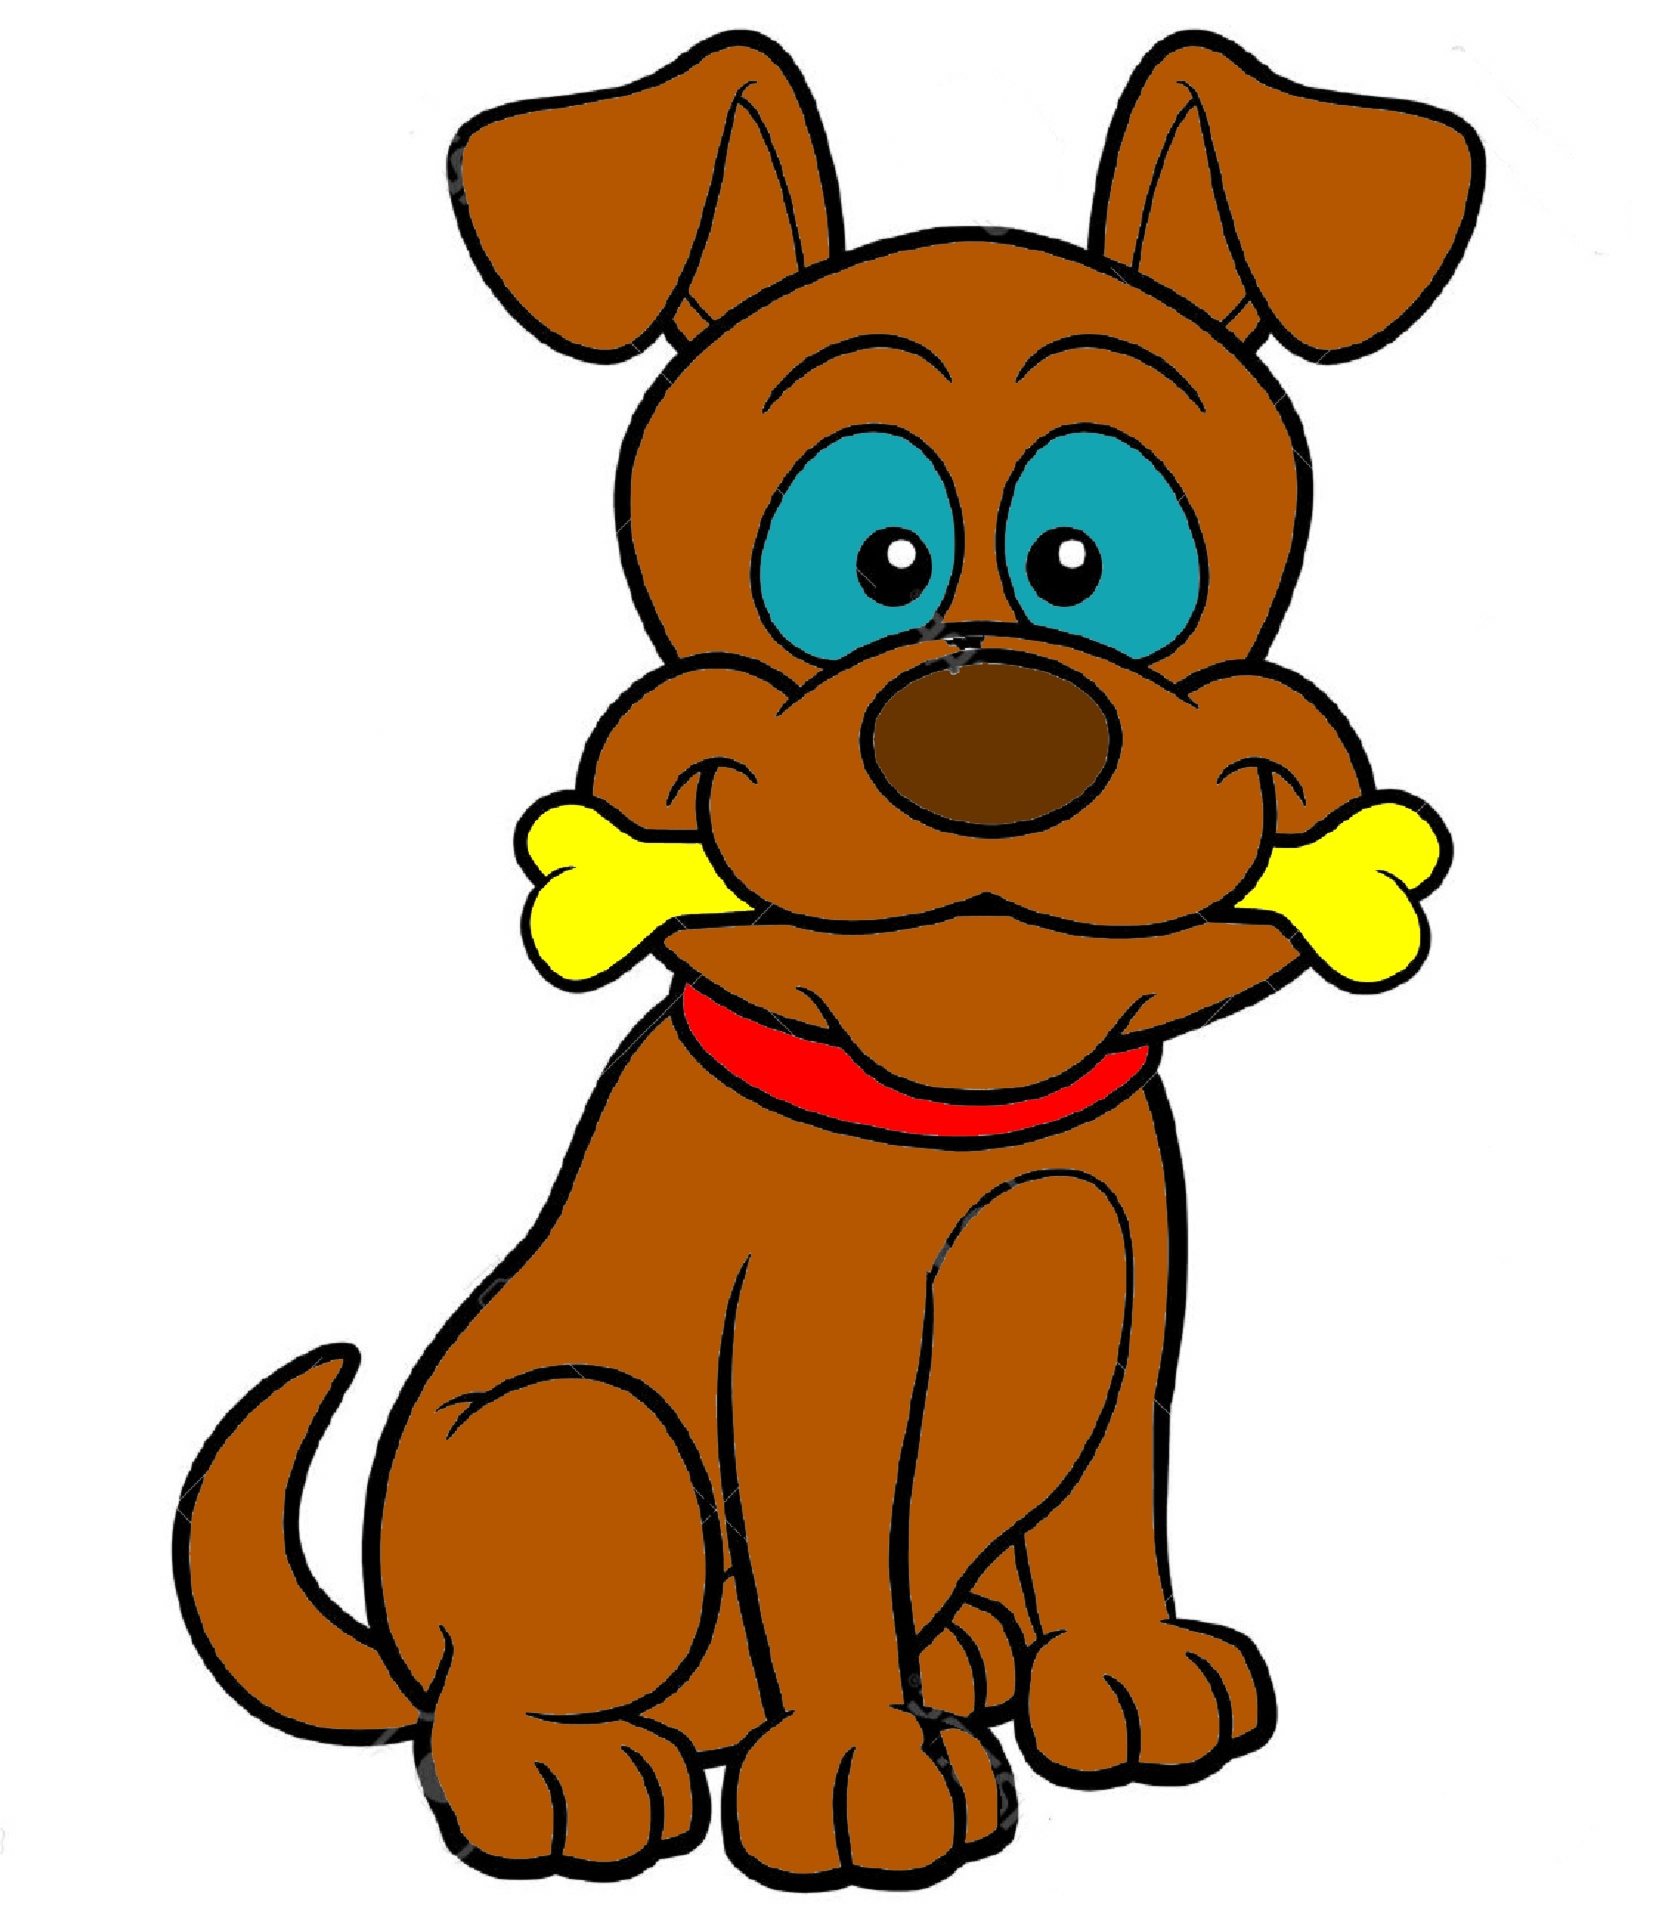 Download free photo of Dog,cartoon,drawing,puppy,animal - from 